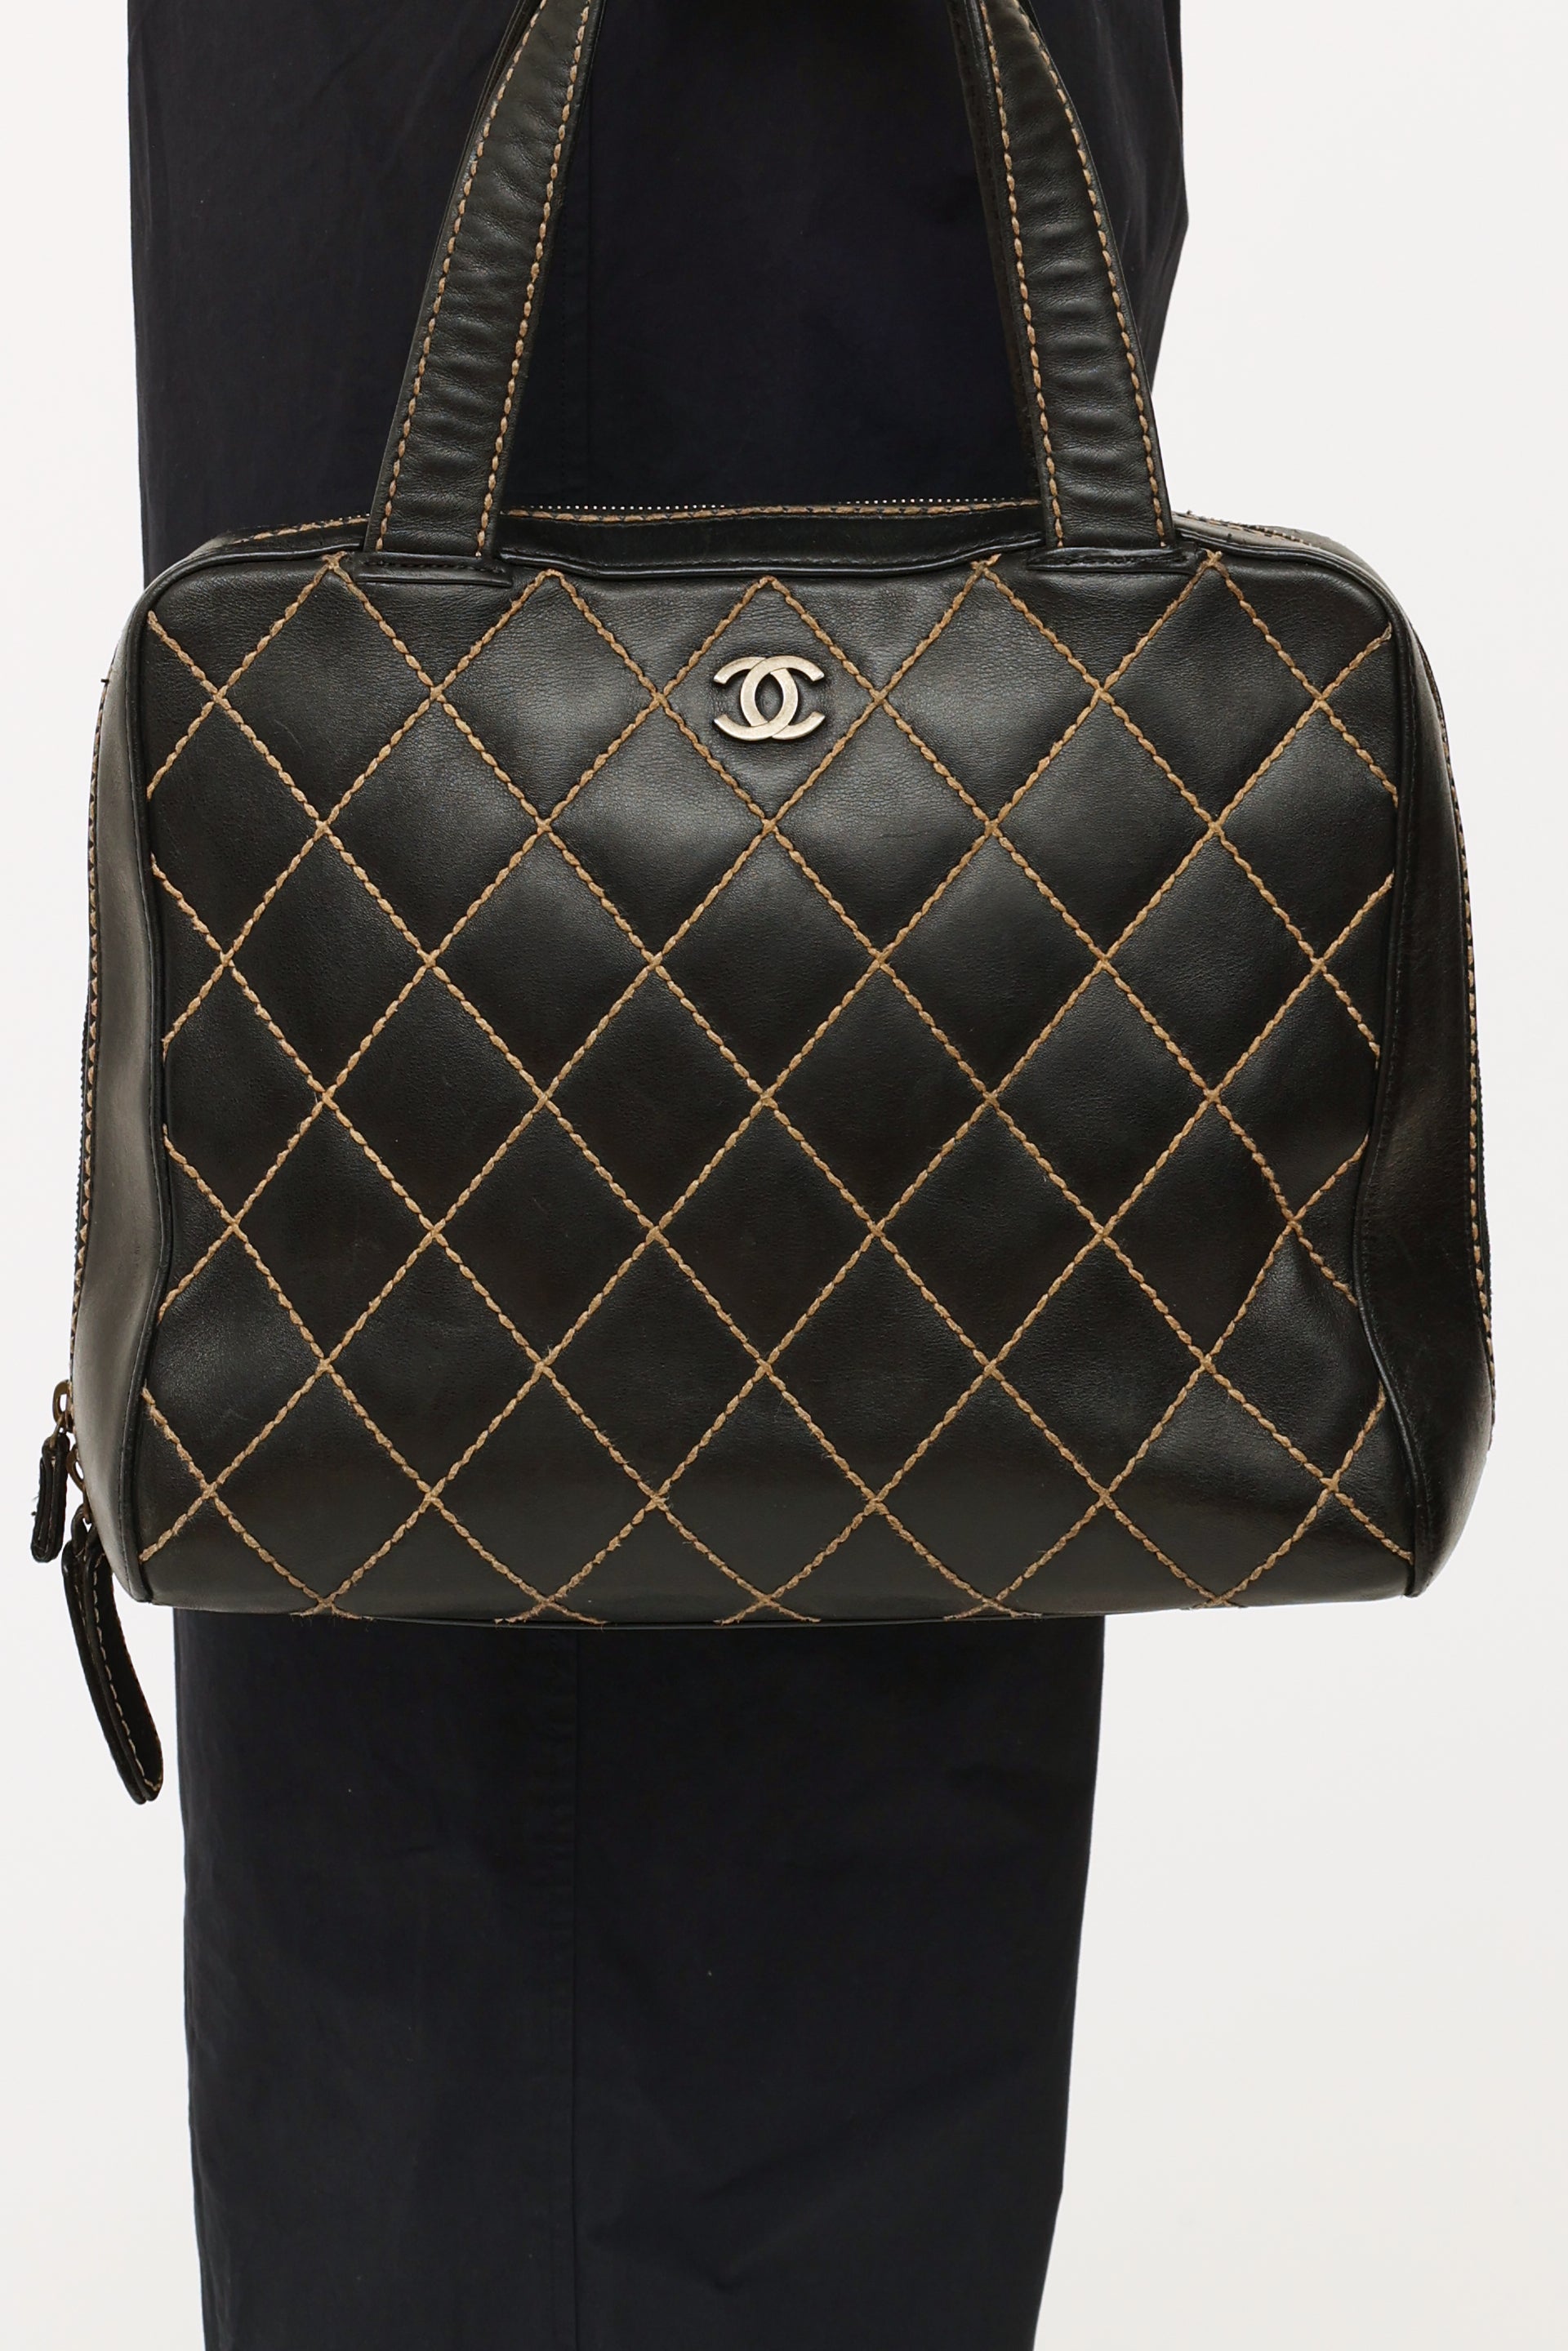 Chanel // Black Quilted Leather Bag – VSP Consignment